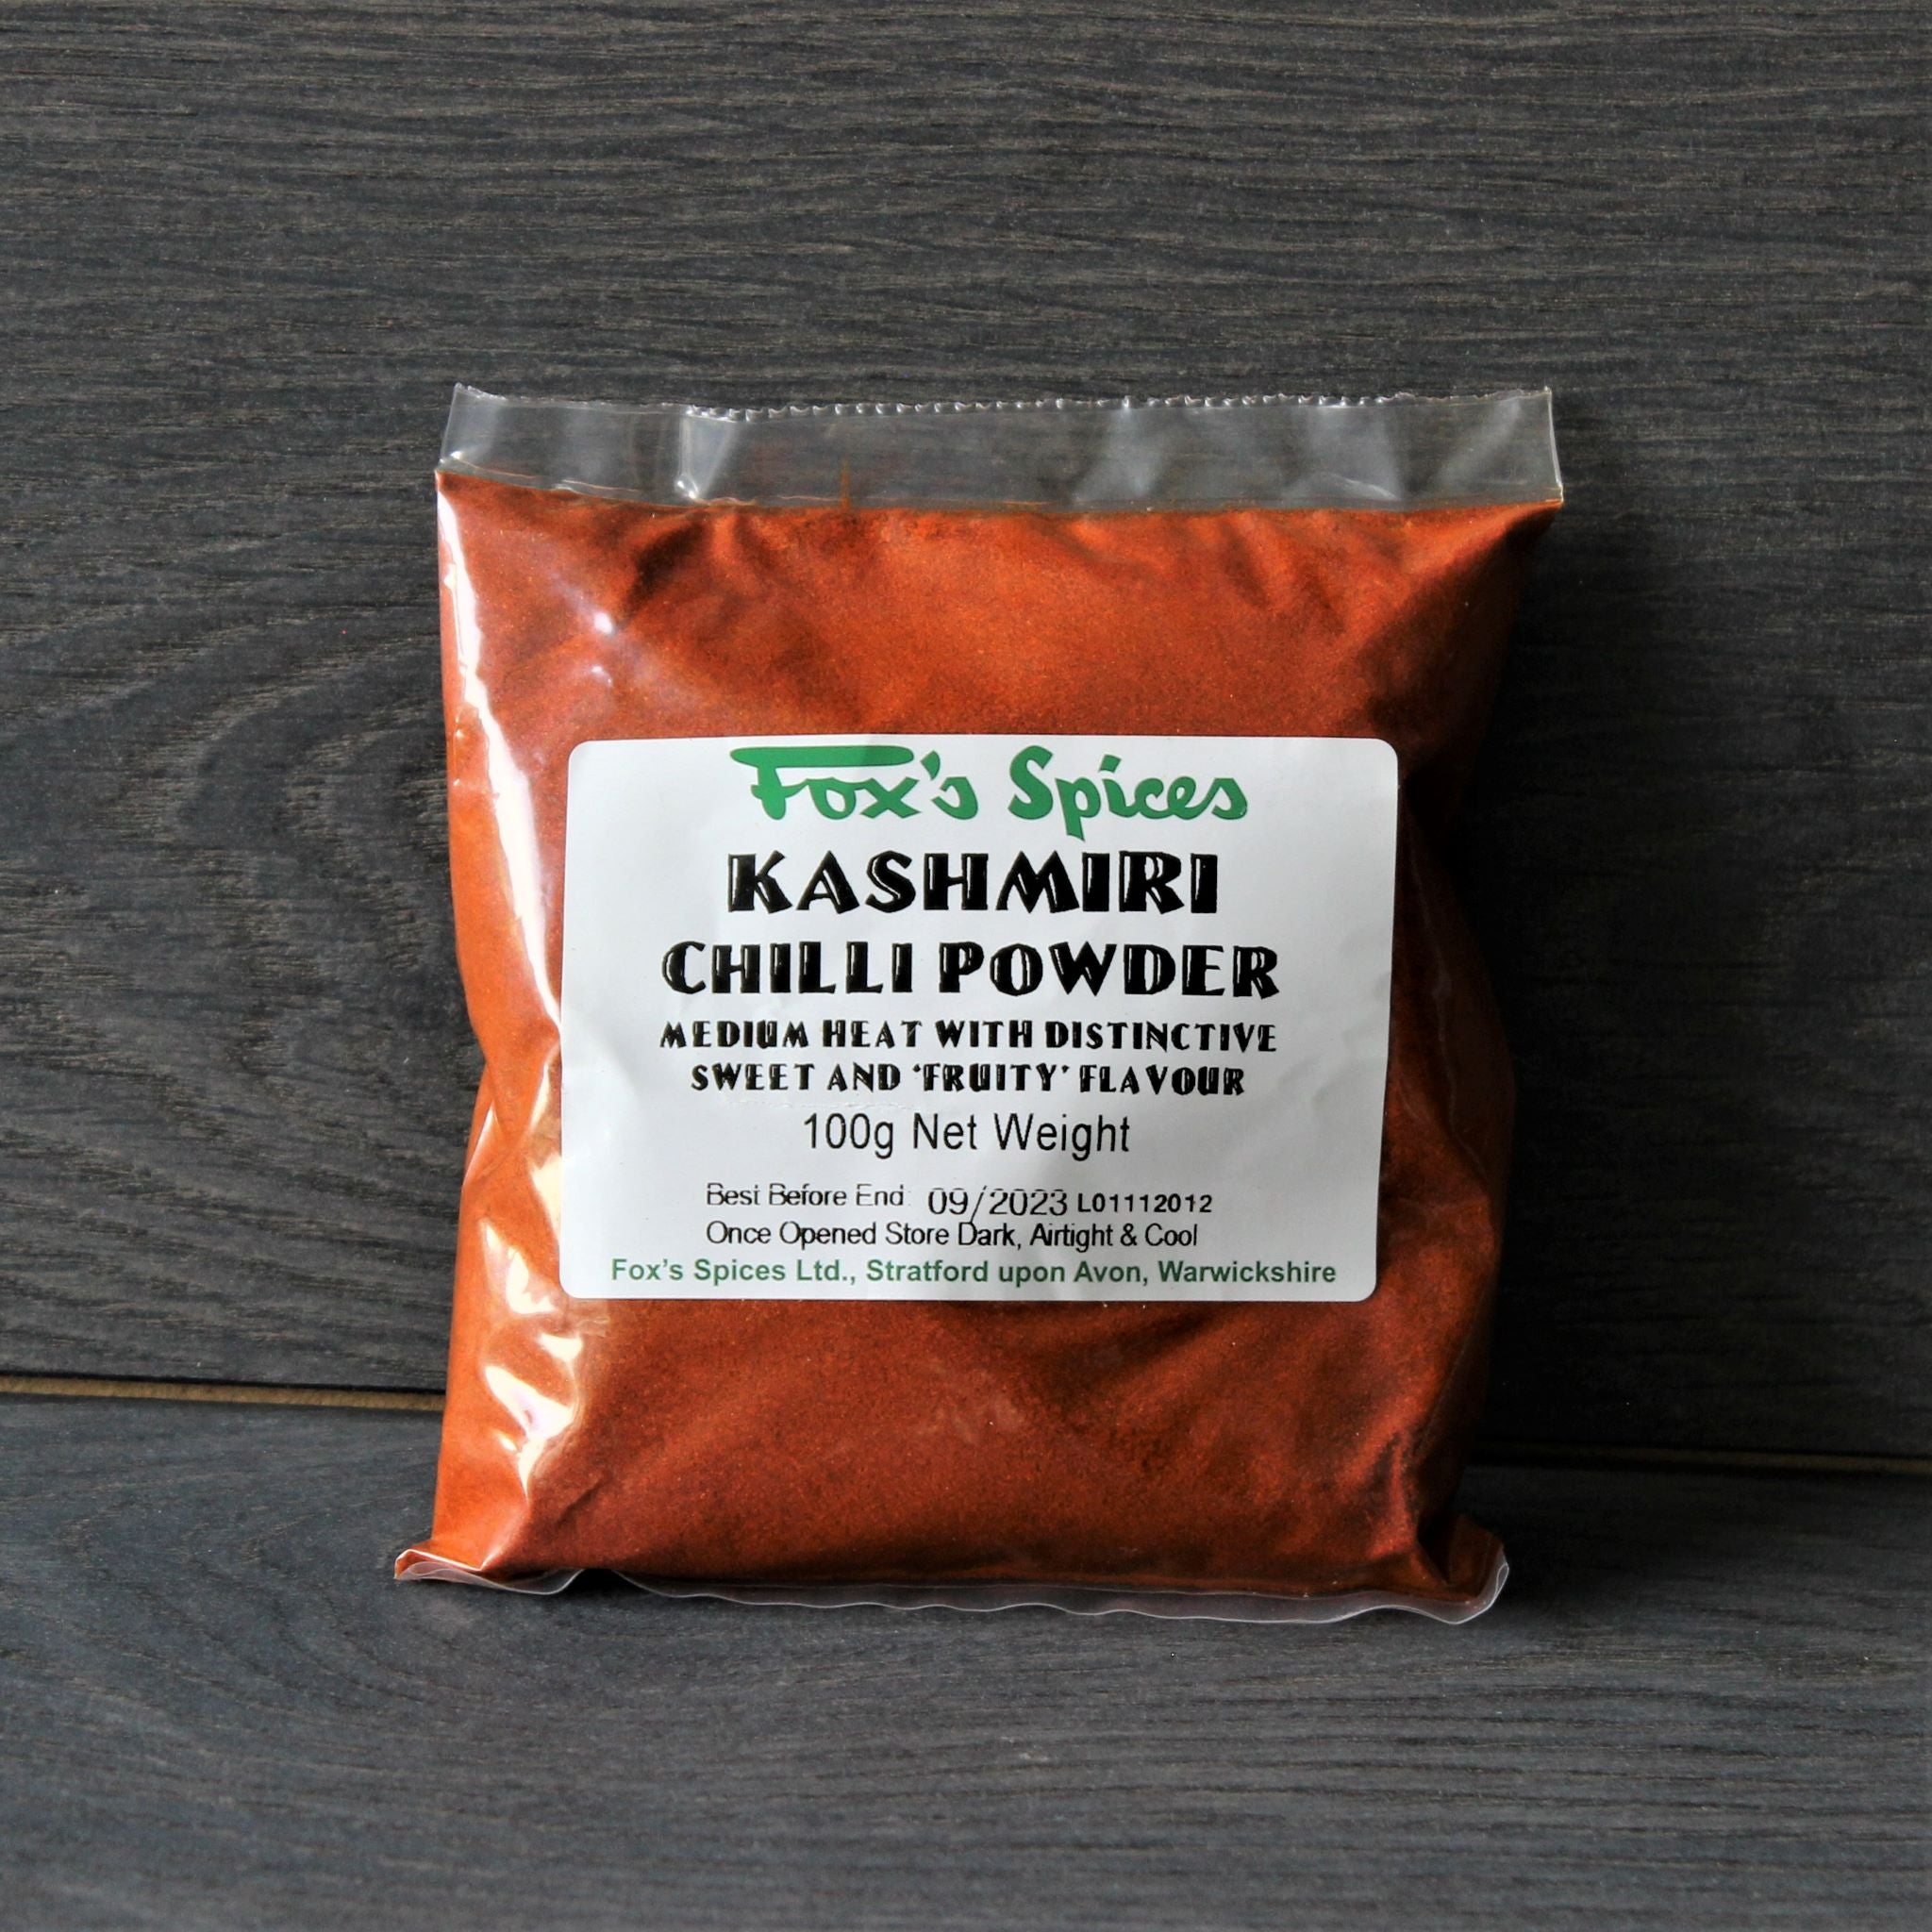 A 100g bag of Kashmiri Chilli Powder from Fox's Spices